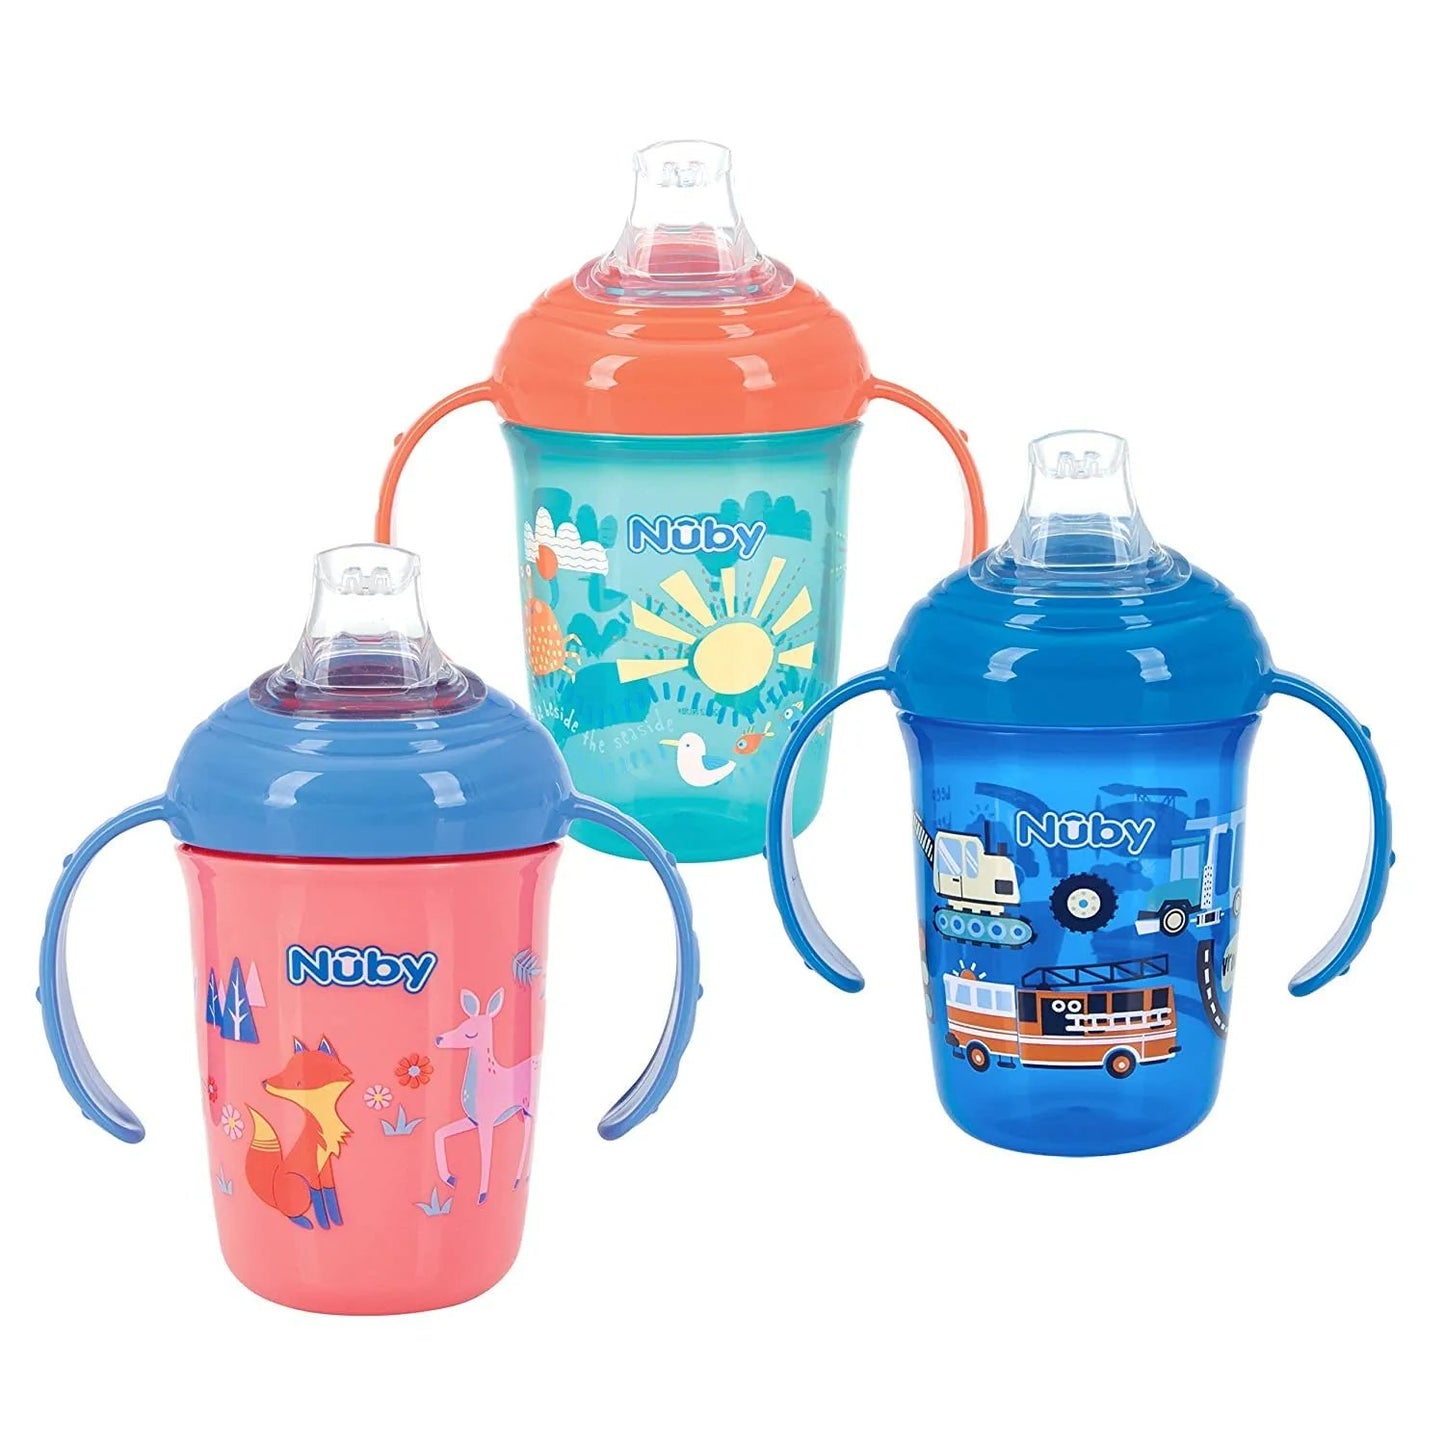 Nuby 2-Handle No-Spill Printed Trainer Cup with Soft Spout and Hygienic Cover - 8oz/ 240 ml, 4+ Months, 1 pk Colors and Prints May Vary